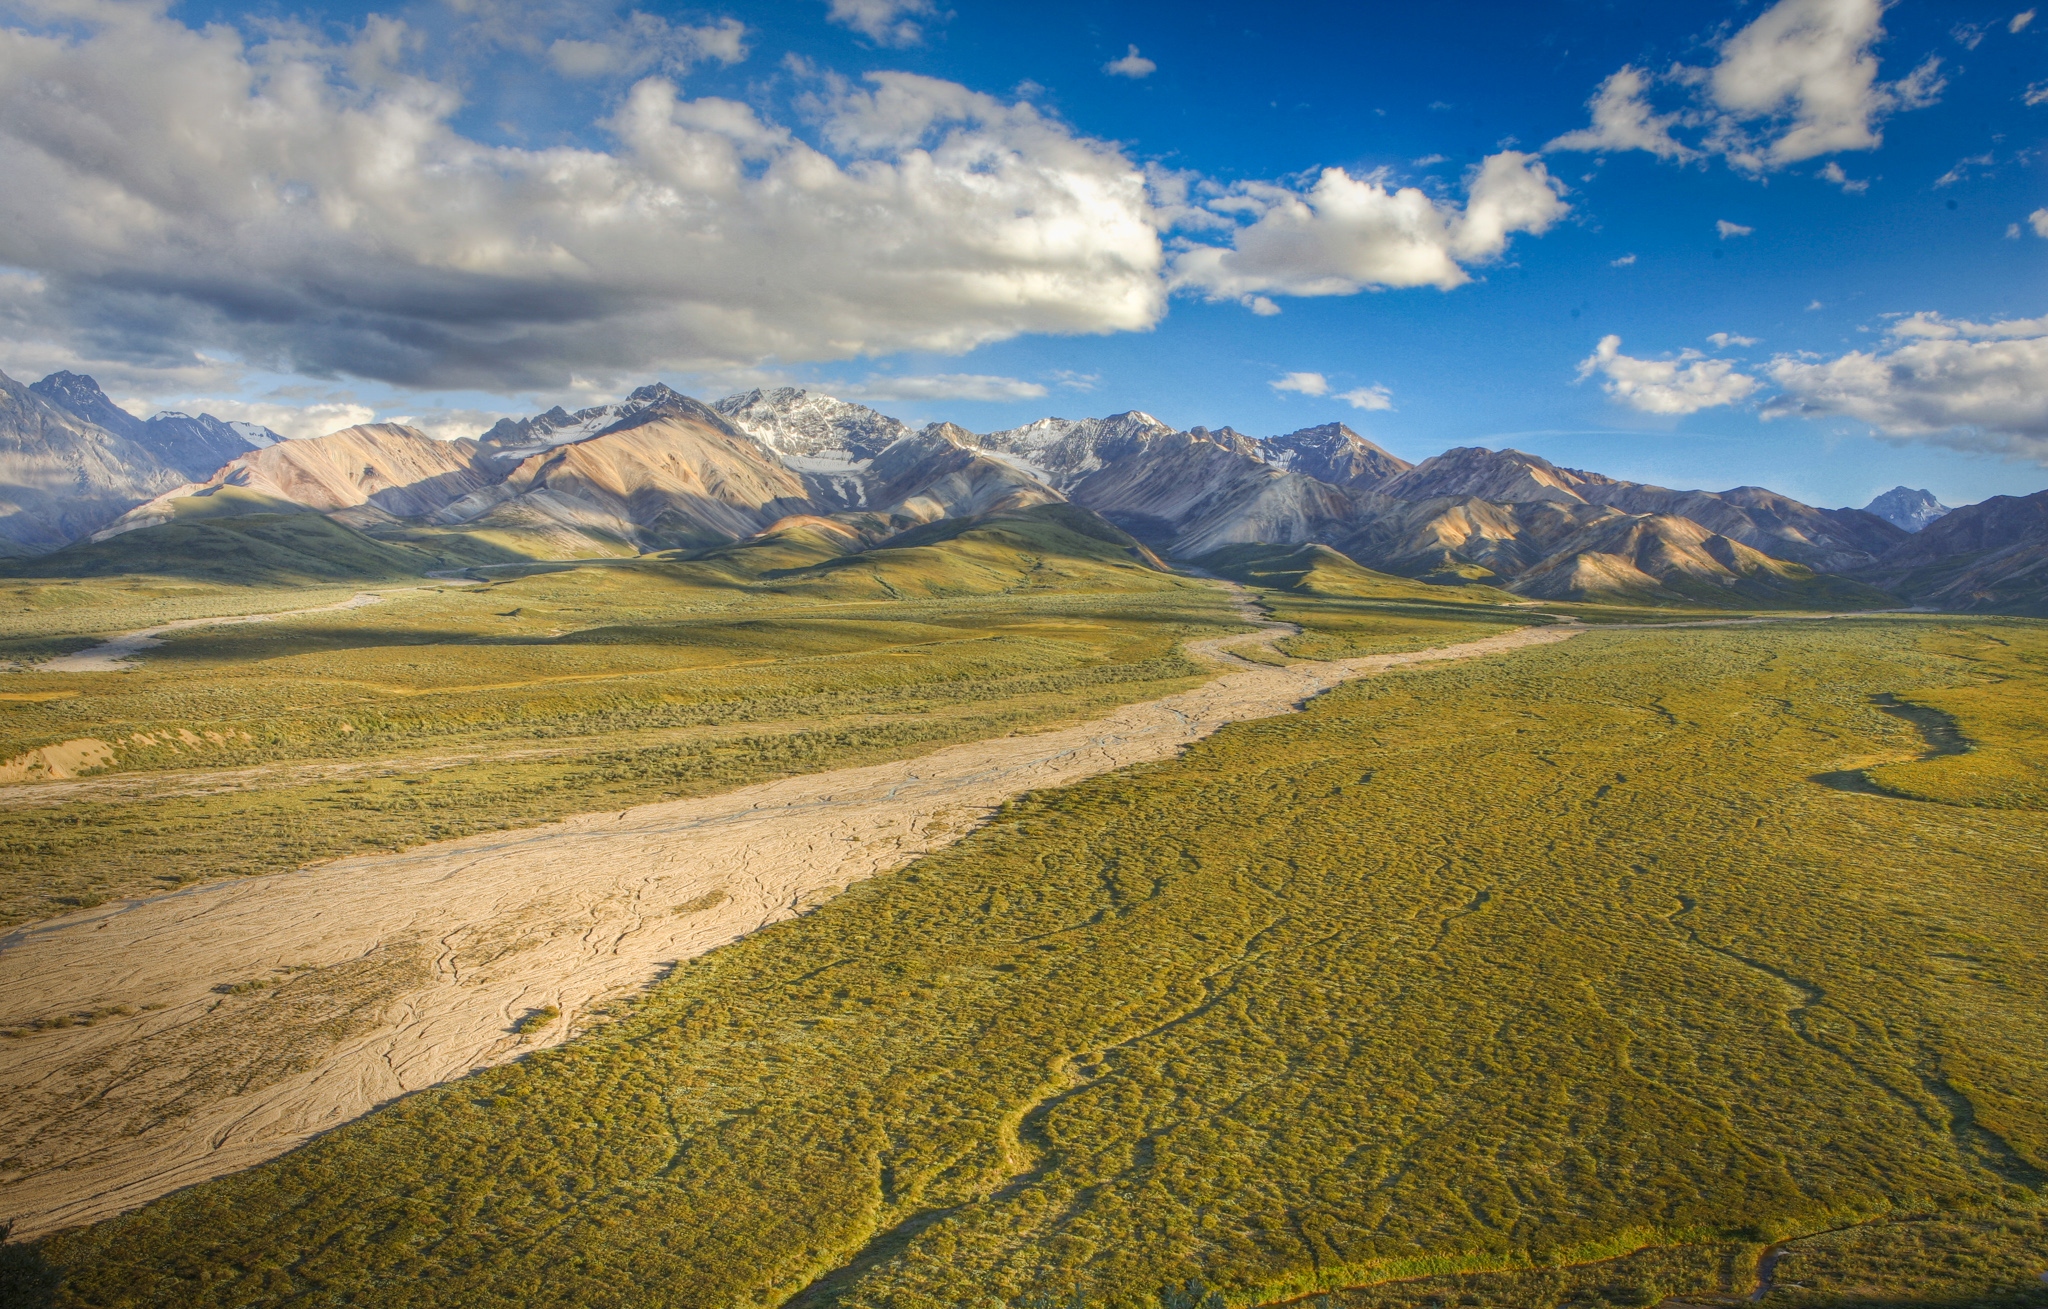 Get up close with the beauty of Denali National Park on a park tour. Photo by Bob Kaufman.